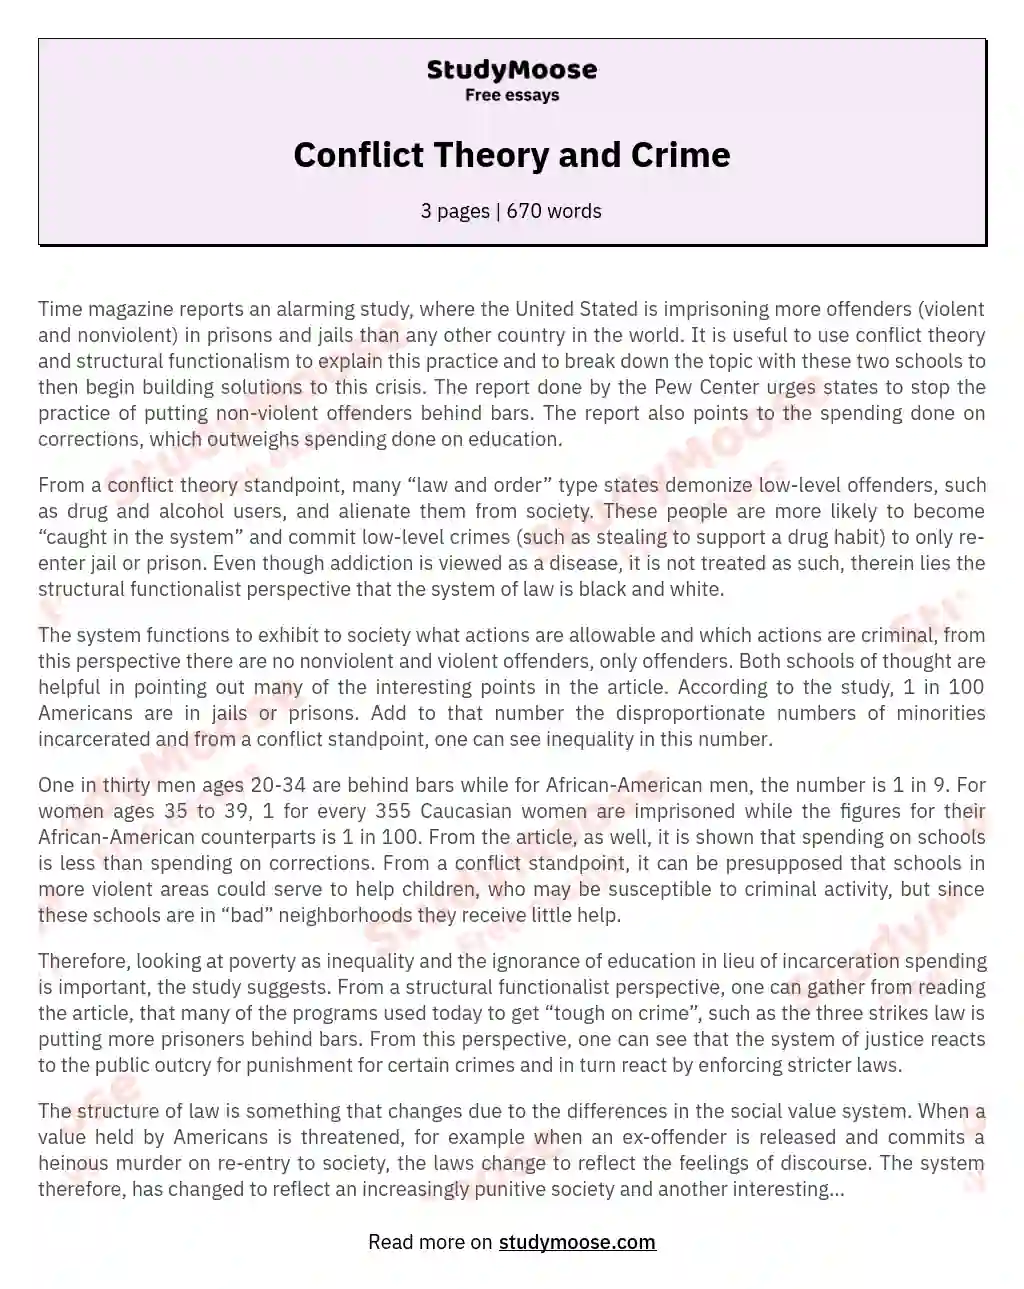 Conflict Theory and Crime essay